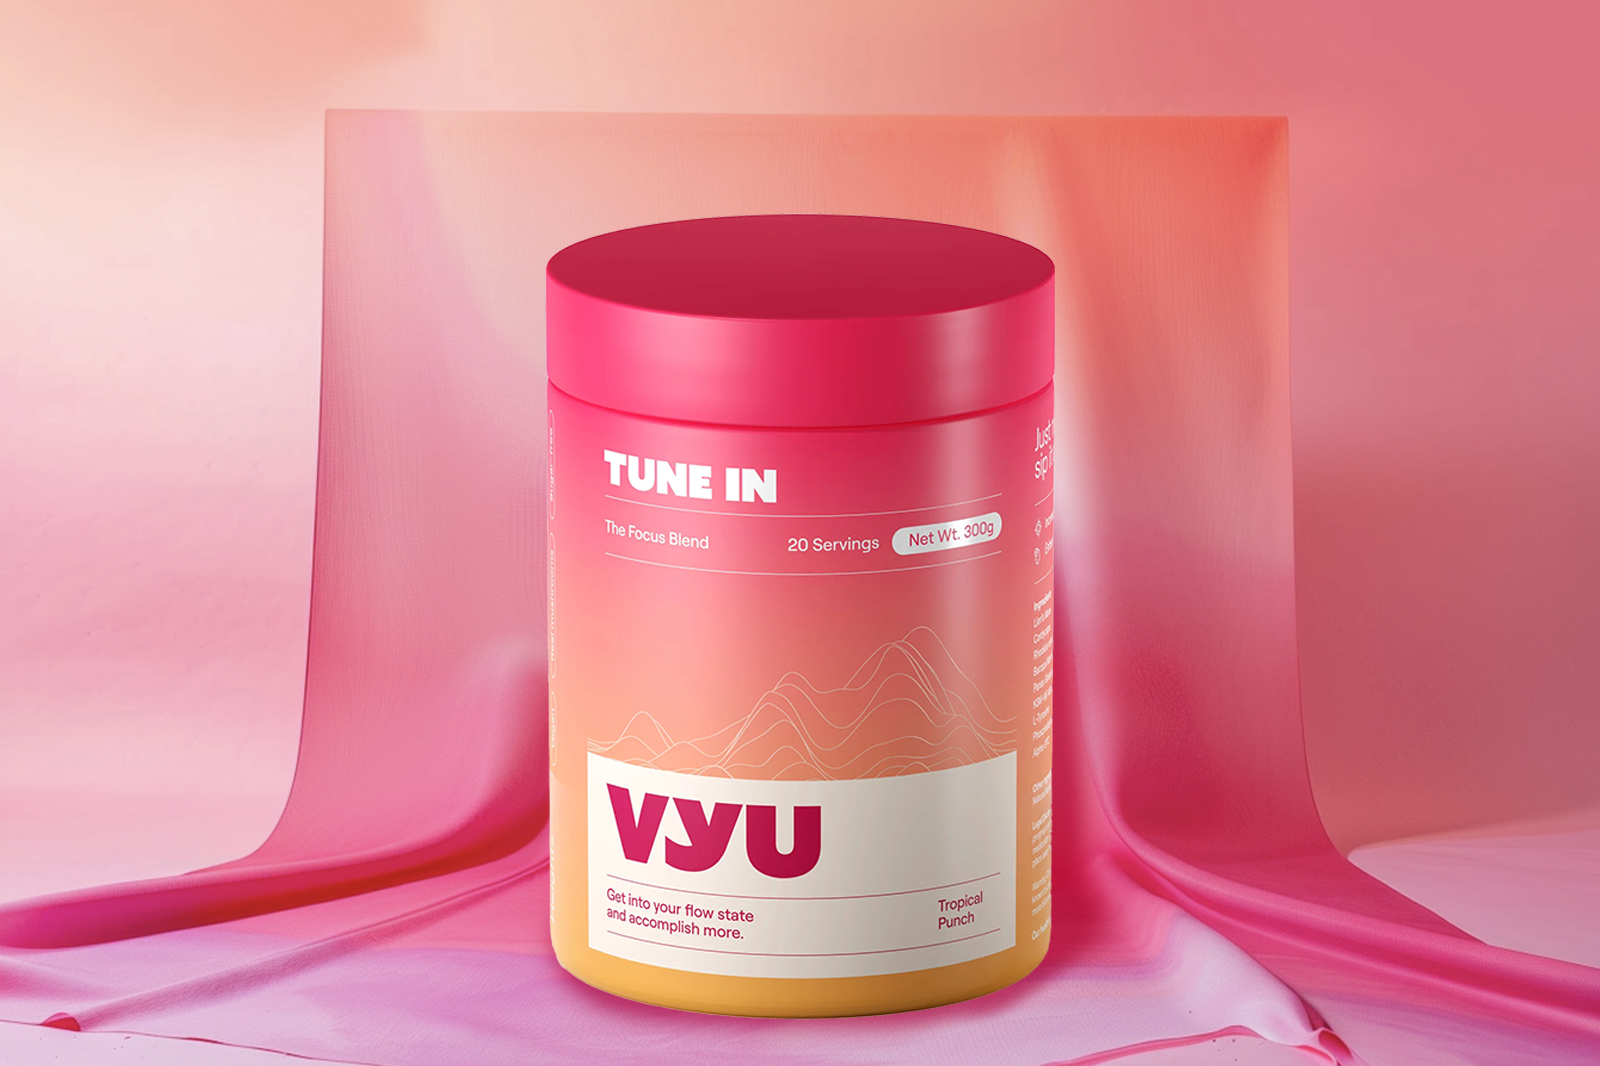 A VYU Tune In container with Tropical Punch flavor placed against a pink-colored background